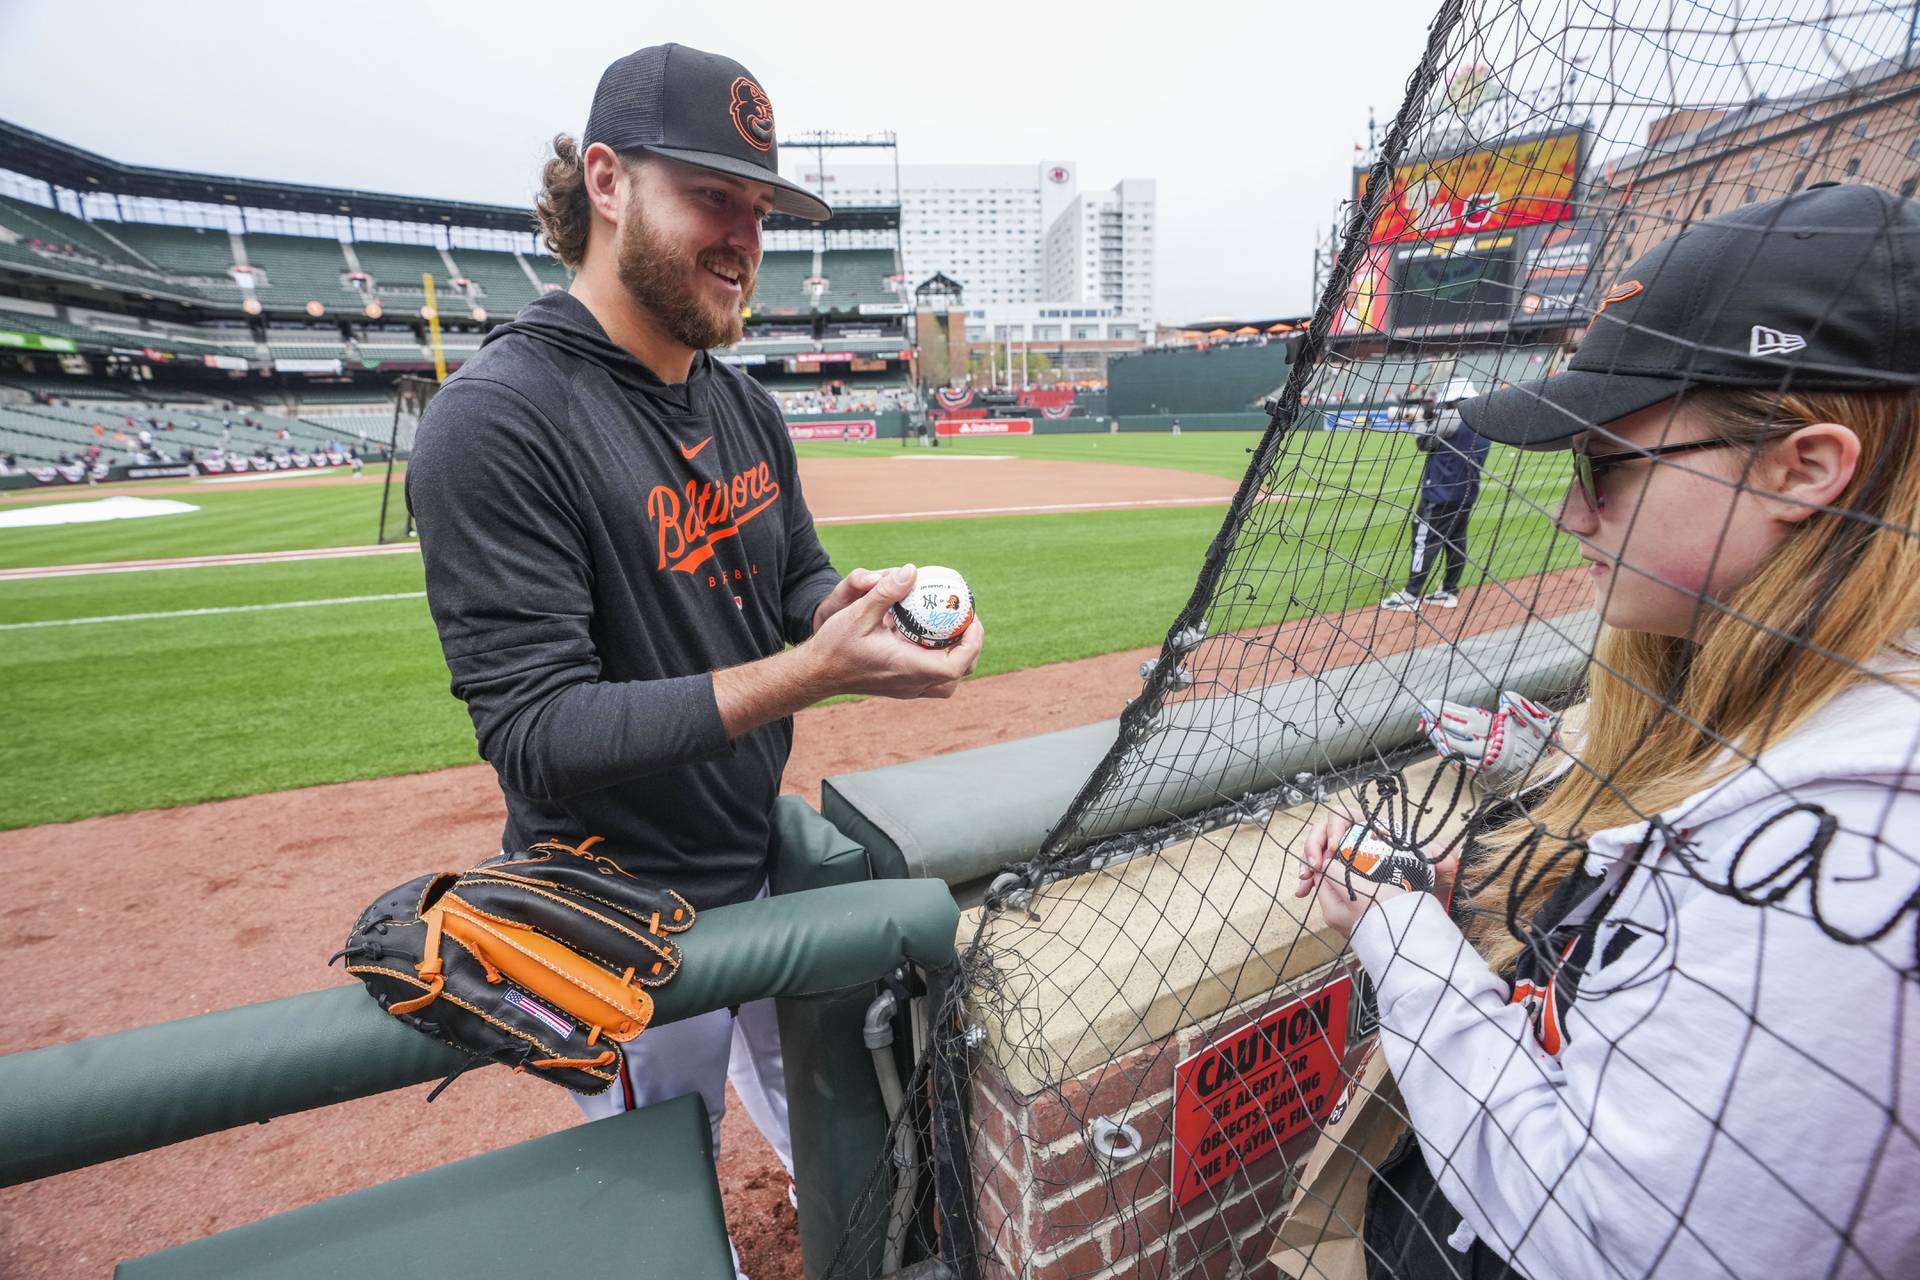 Pat McFaul of Rosedale also know by his nickname “Old School” high-fives fans as they make their way around Camden yards before the Home Opener Orioles against divisional rivals New York Yankees.